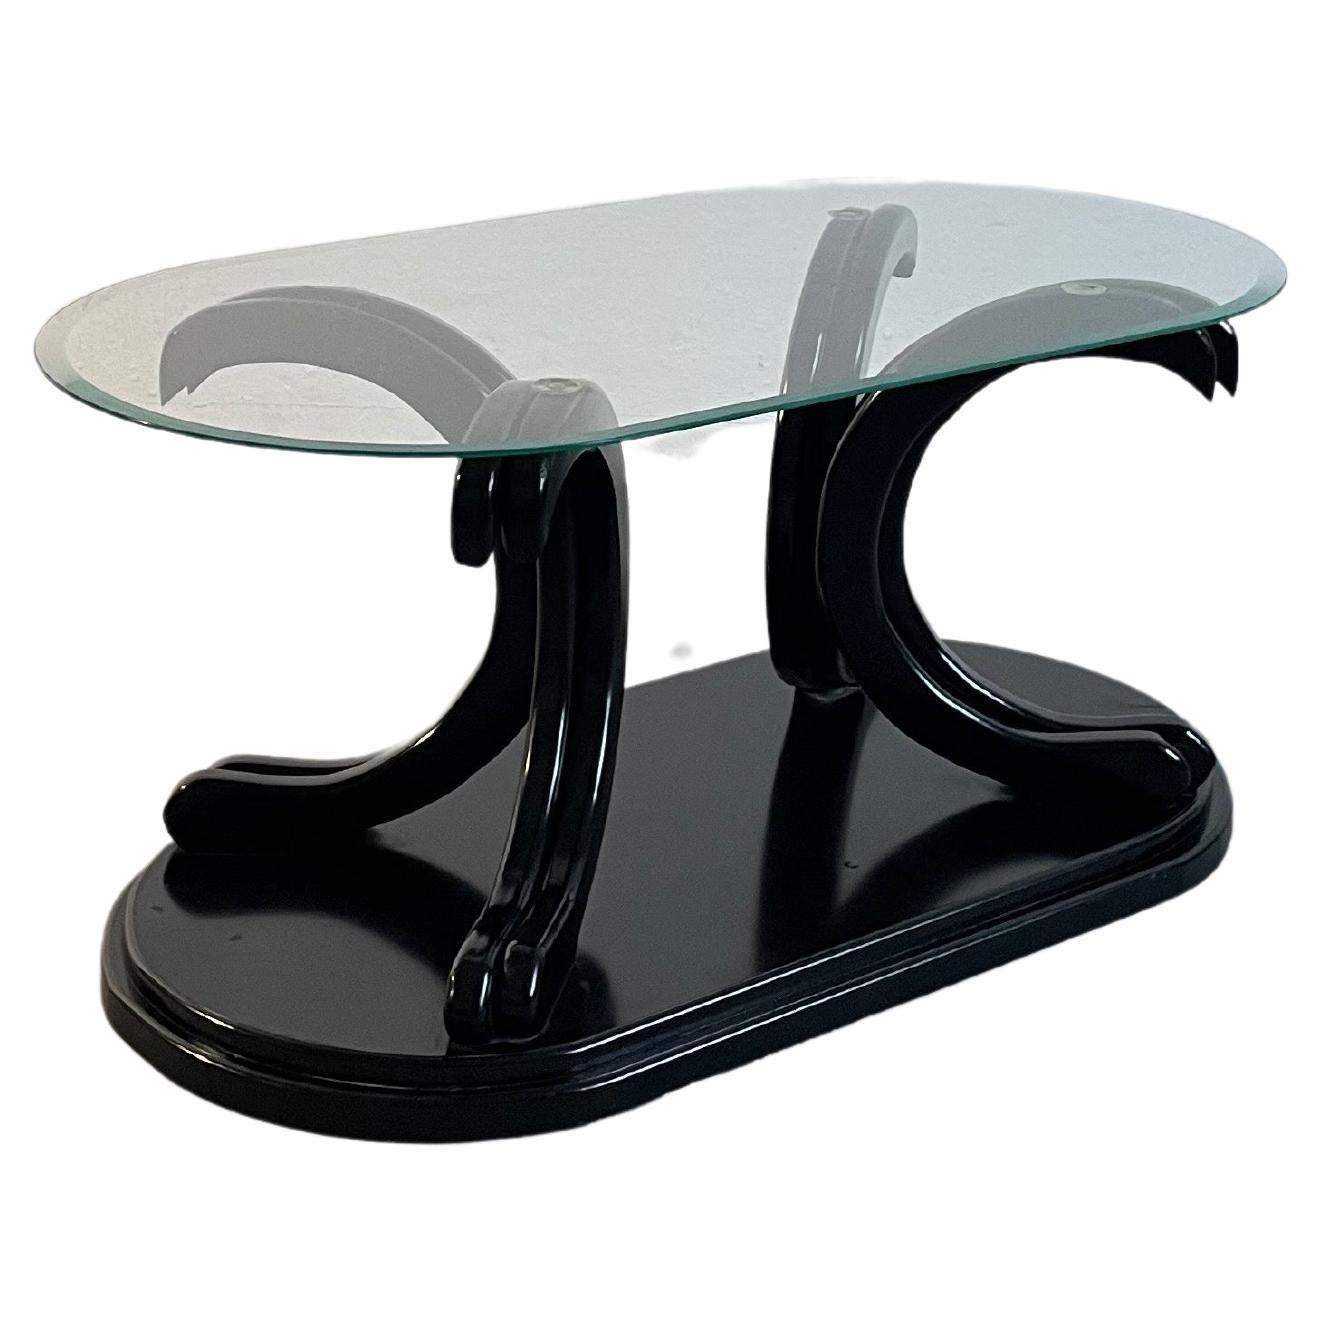 Vintage Postmodern Italian Coffee Table, Black Lacquered Wood and Glass, 1980s For Sale